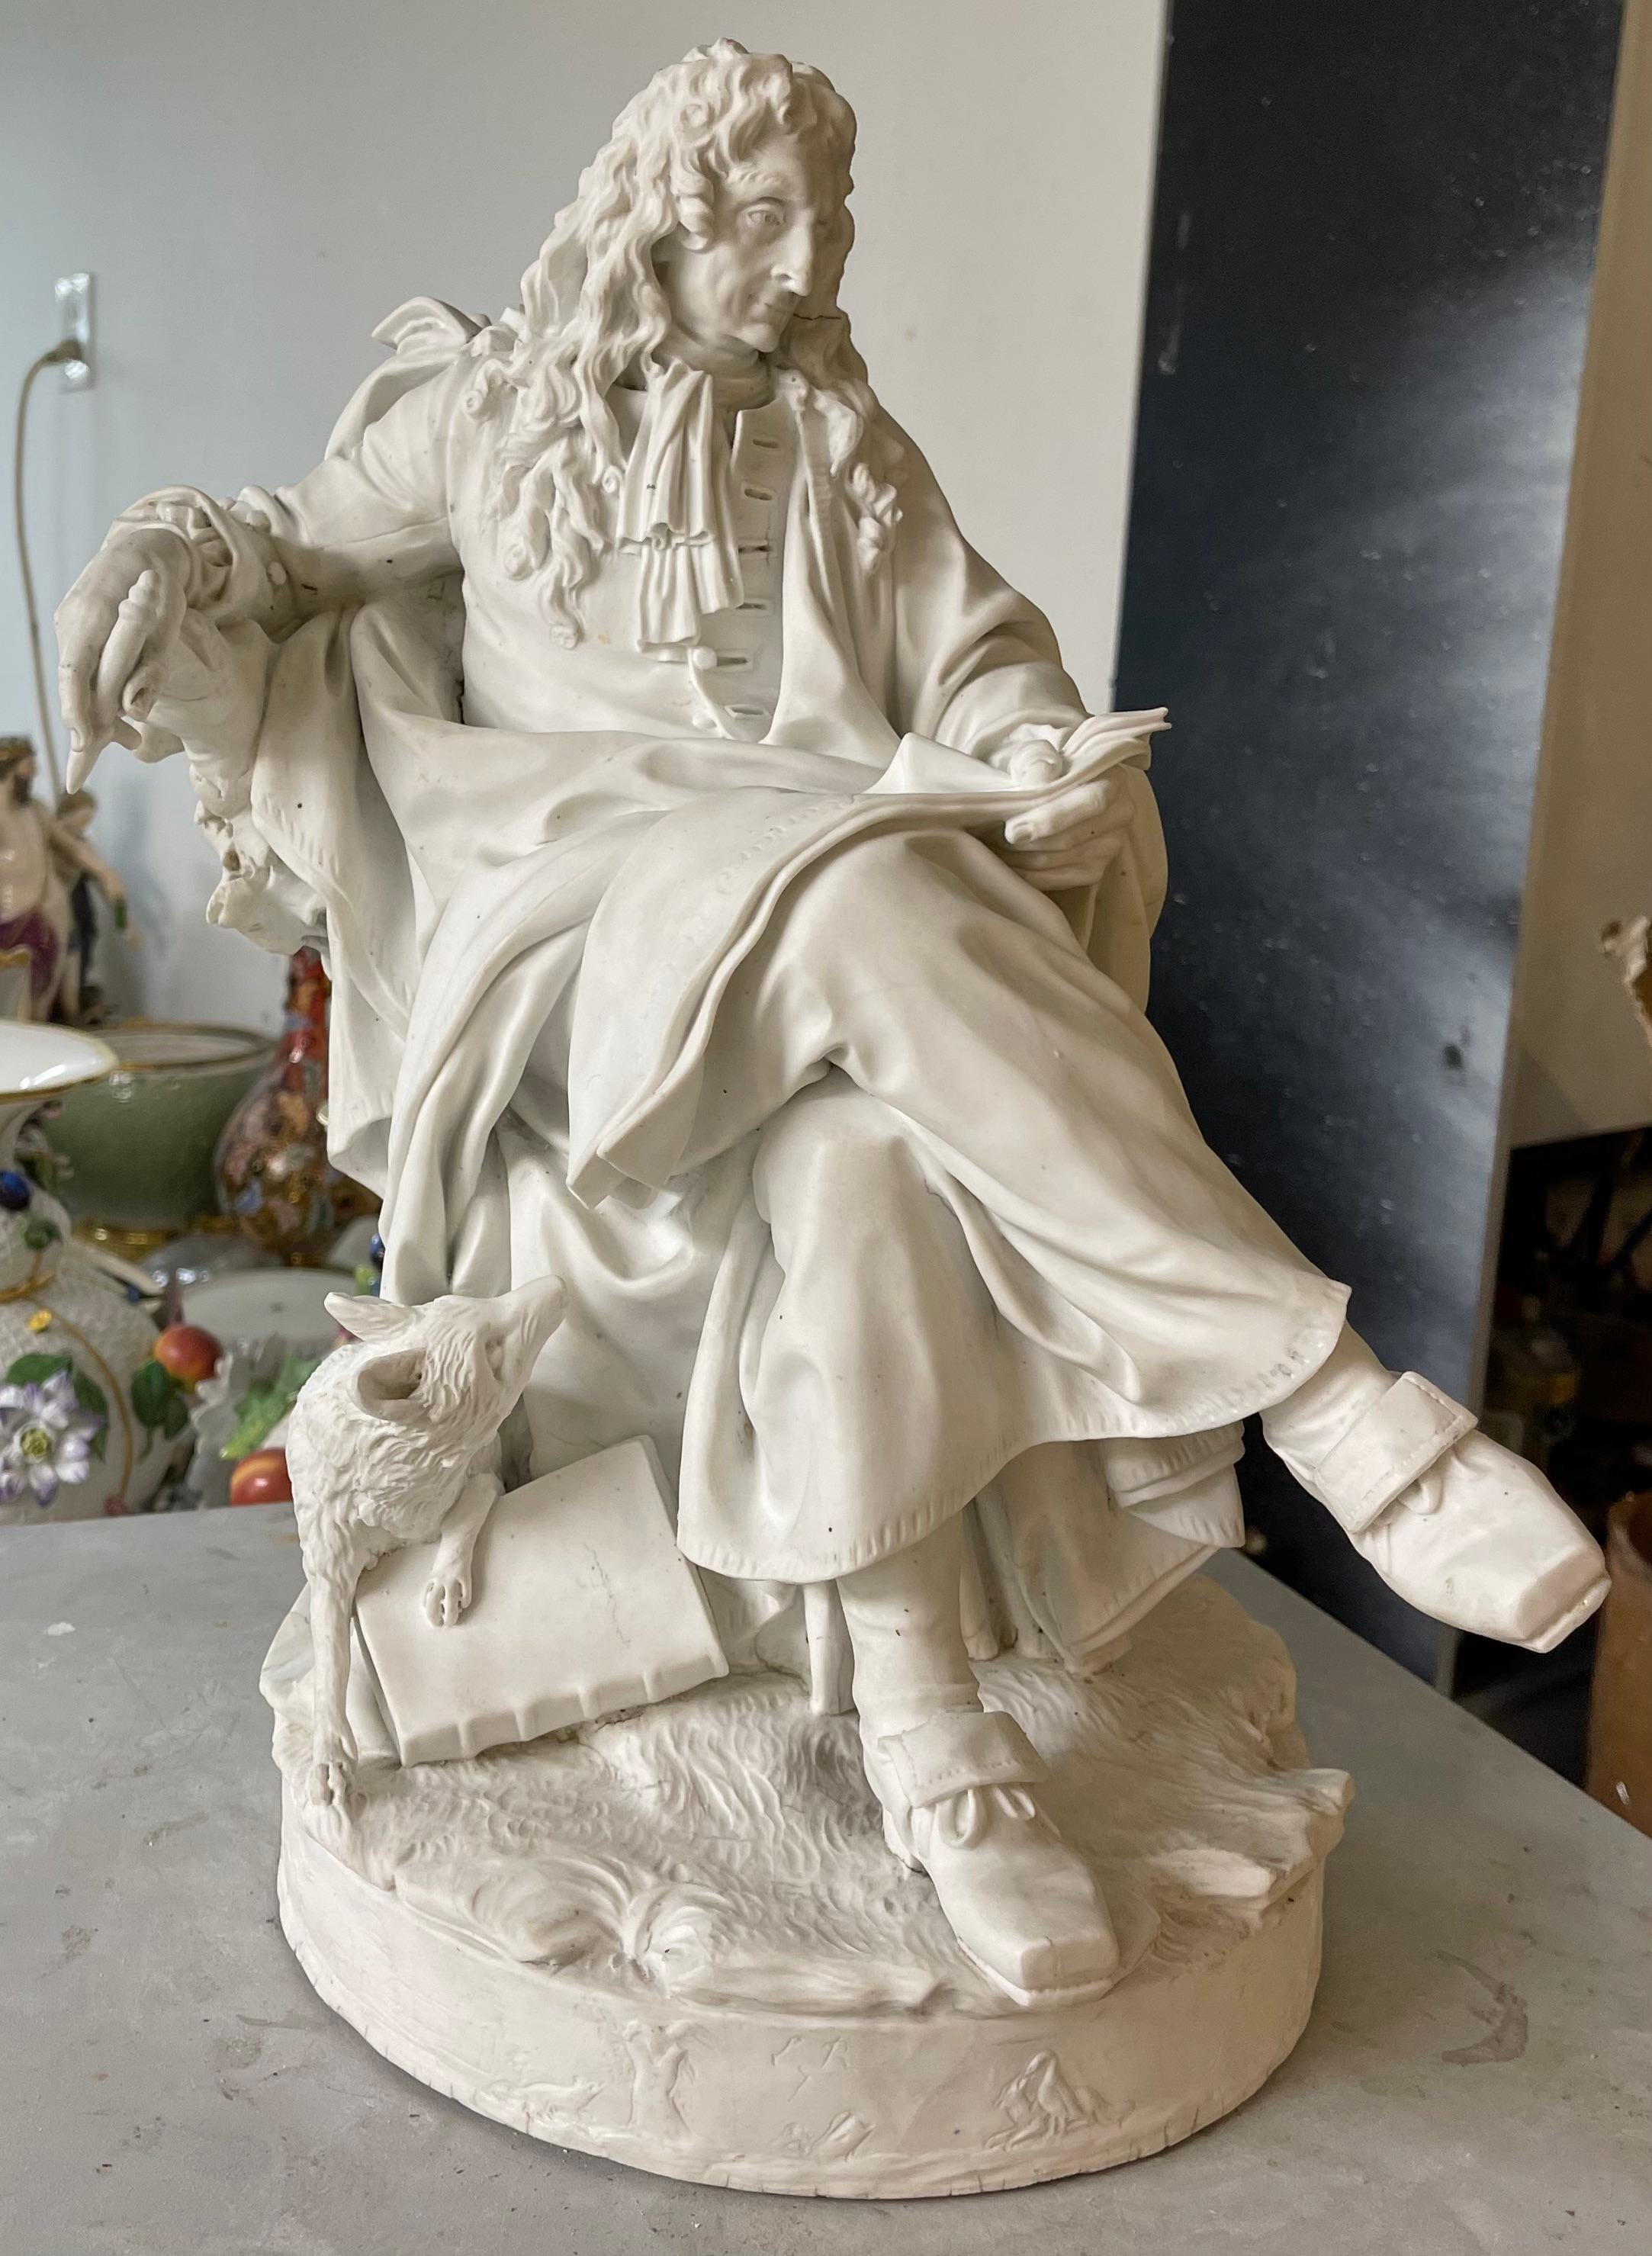 A SEVRES (HARD PASTE) BISCUIT FIGURE OF 'JEAN DE LA FONTAINE' FROM THE SERIES OF 'LES GRANDS HOMMES'
circa 1784, INCISED L R 7 TO BASE AT FRONT 
Modelled by Pierre Julien (1731-1804) and produced at Sevres in Biscuit Porcelain in 1784. Under the